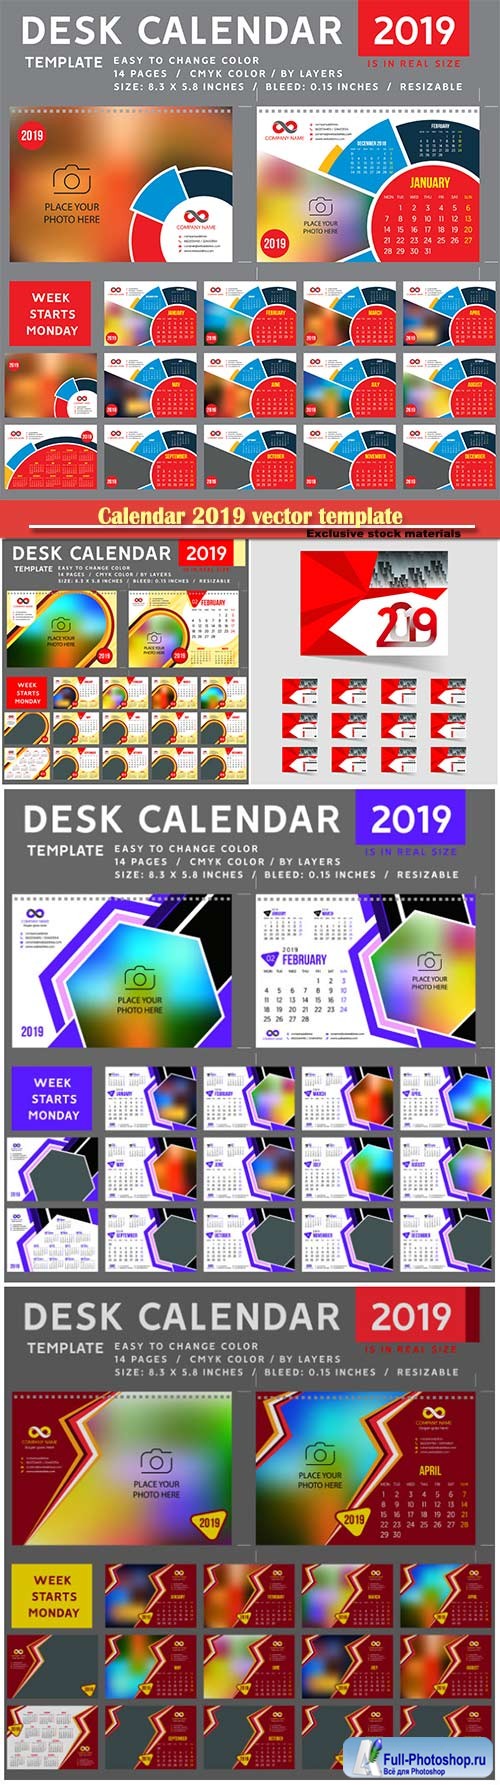 Calendar 2019 vector template, 12 months included # 3